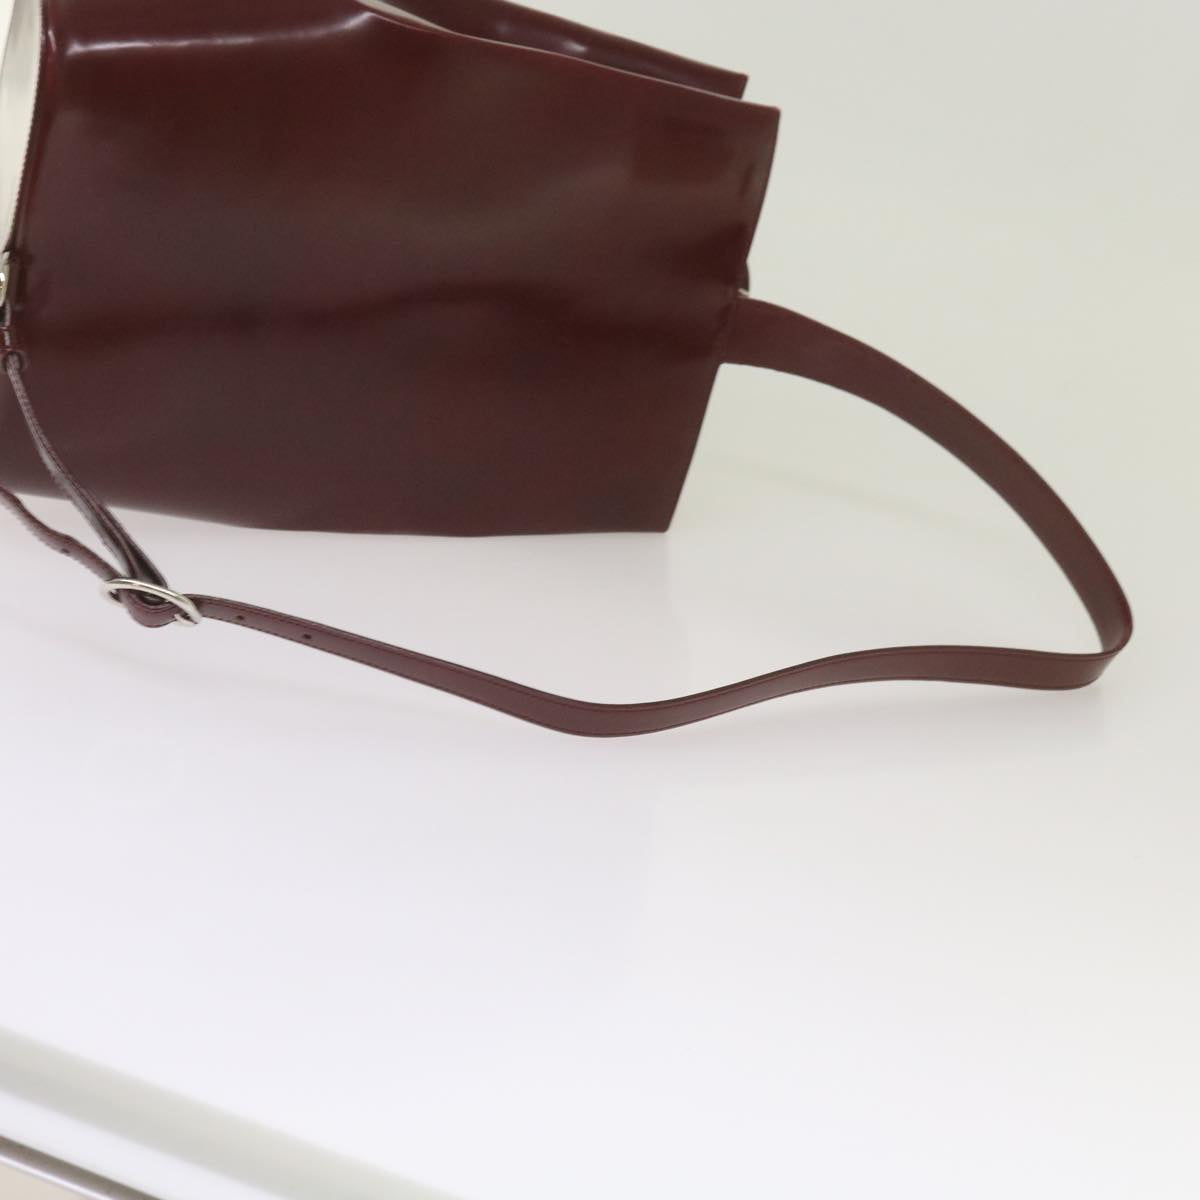 CARTIER Shoulder Bag Leather Wine Red Auth bs12453